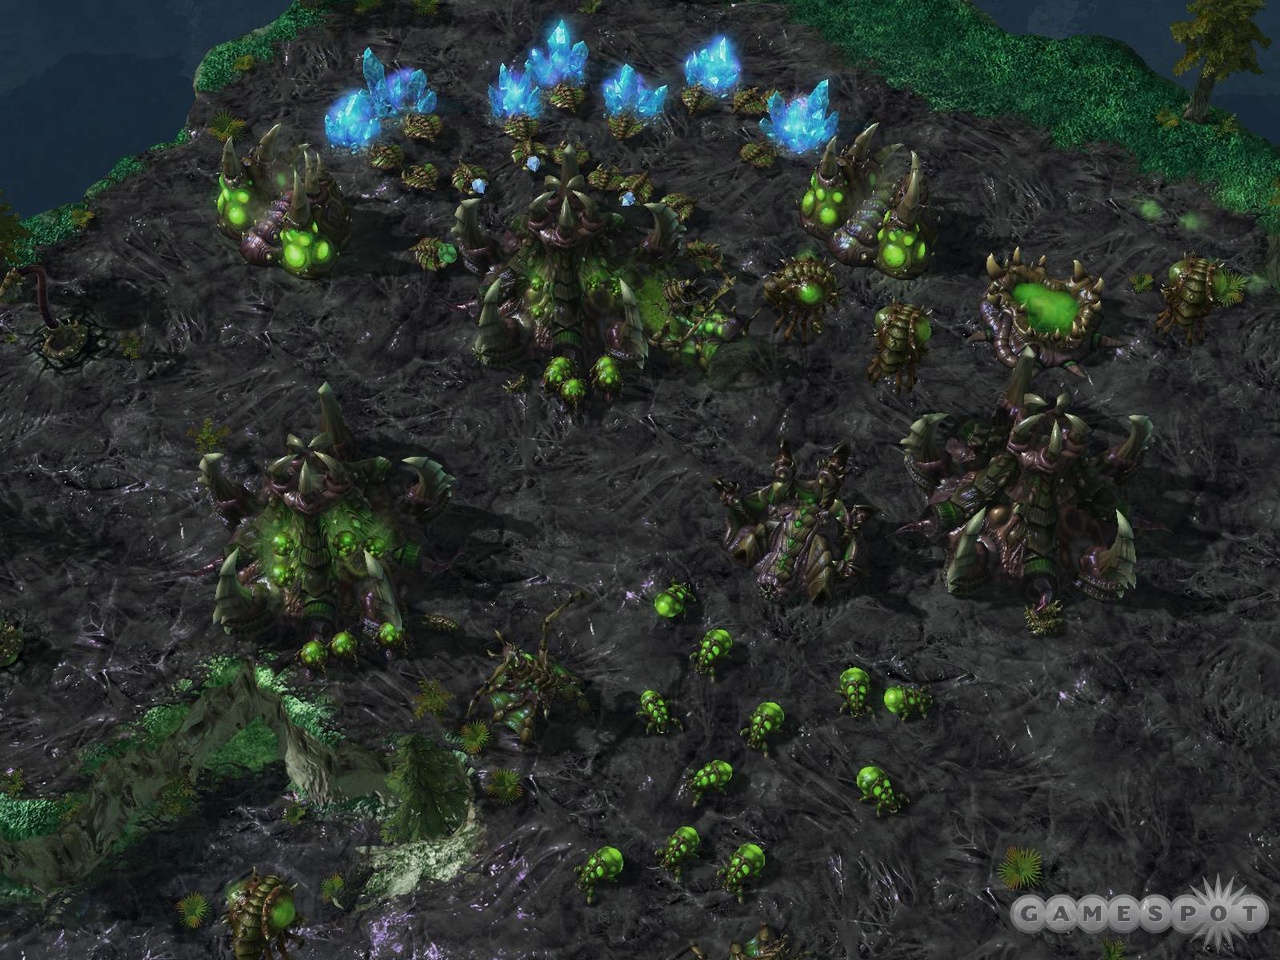 The Zerg Queen is one of the units Blizzard has given a massive overhaul.